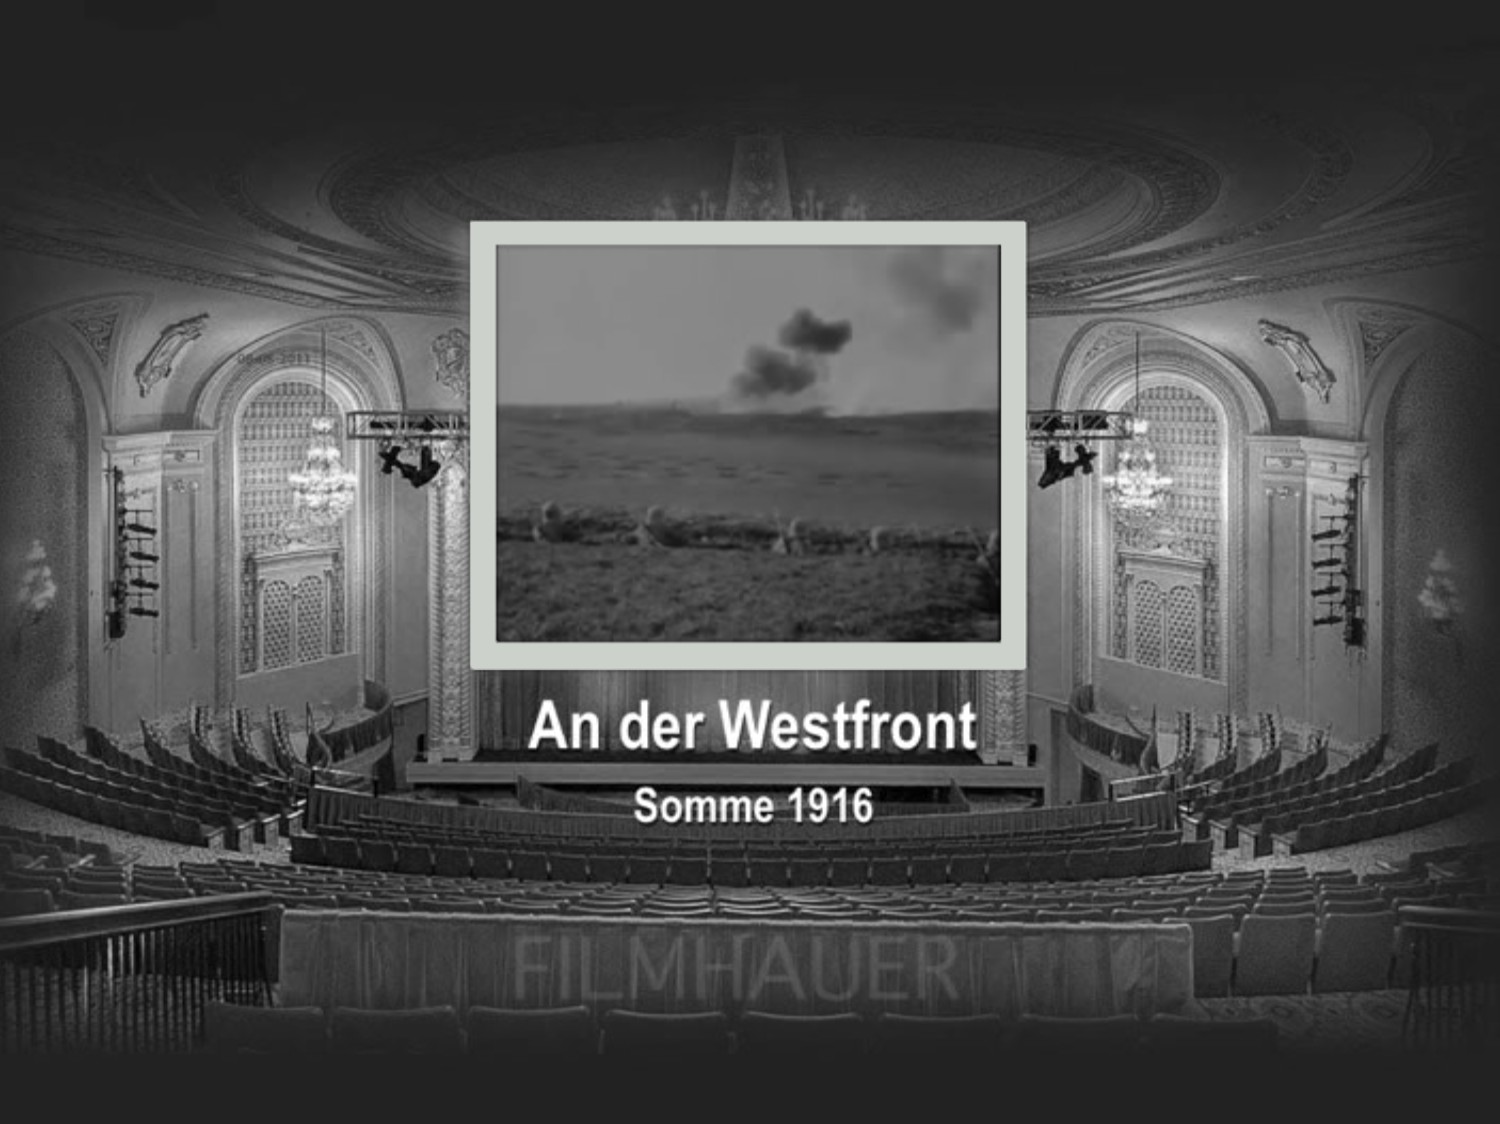 AN DER WESTFRONT SOMME 1916